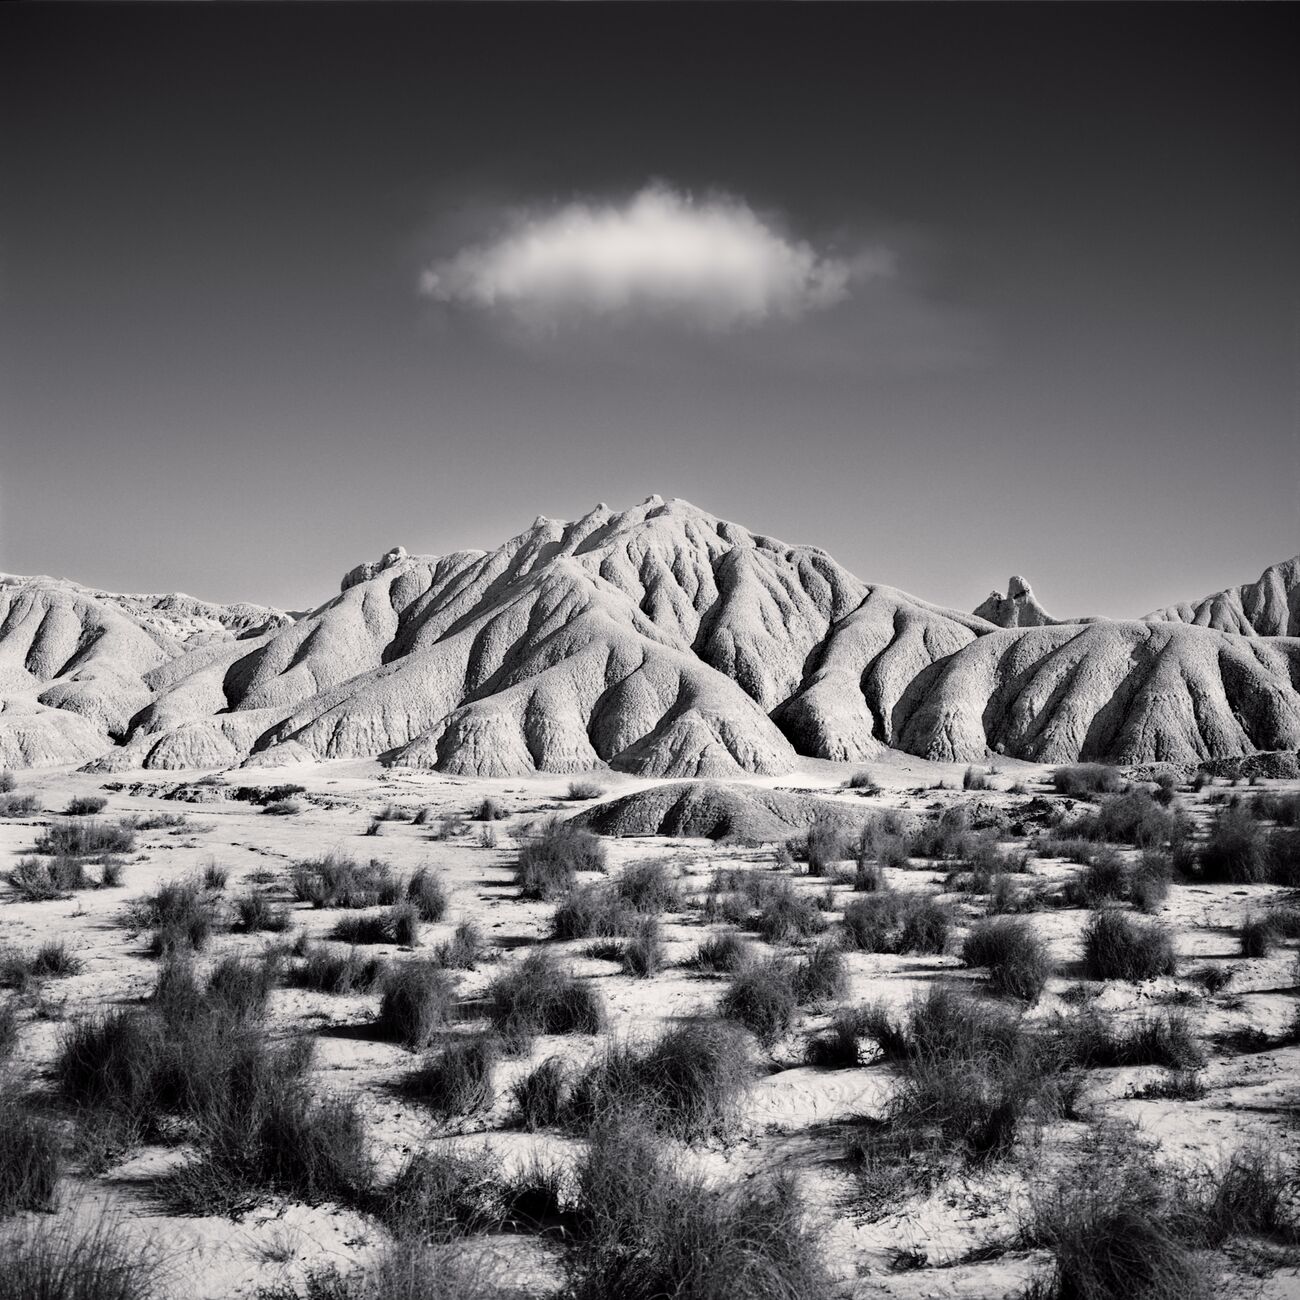 Cloud Over Dry Hills, Bardenas Reales, Spain. February 2022. Ref-11577 - Denis Olivier Art Photography